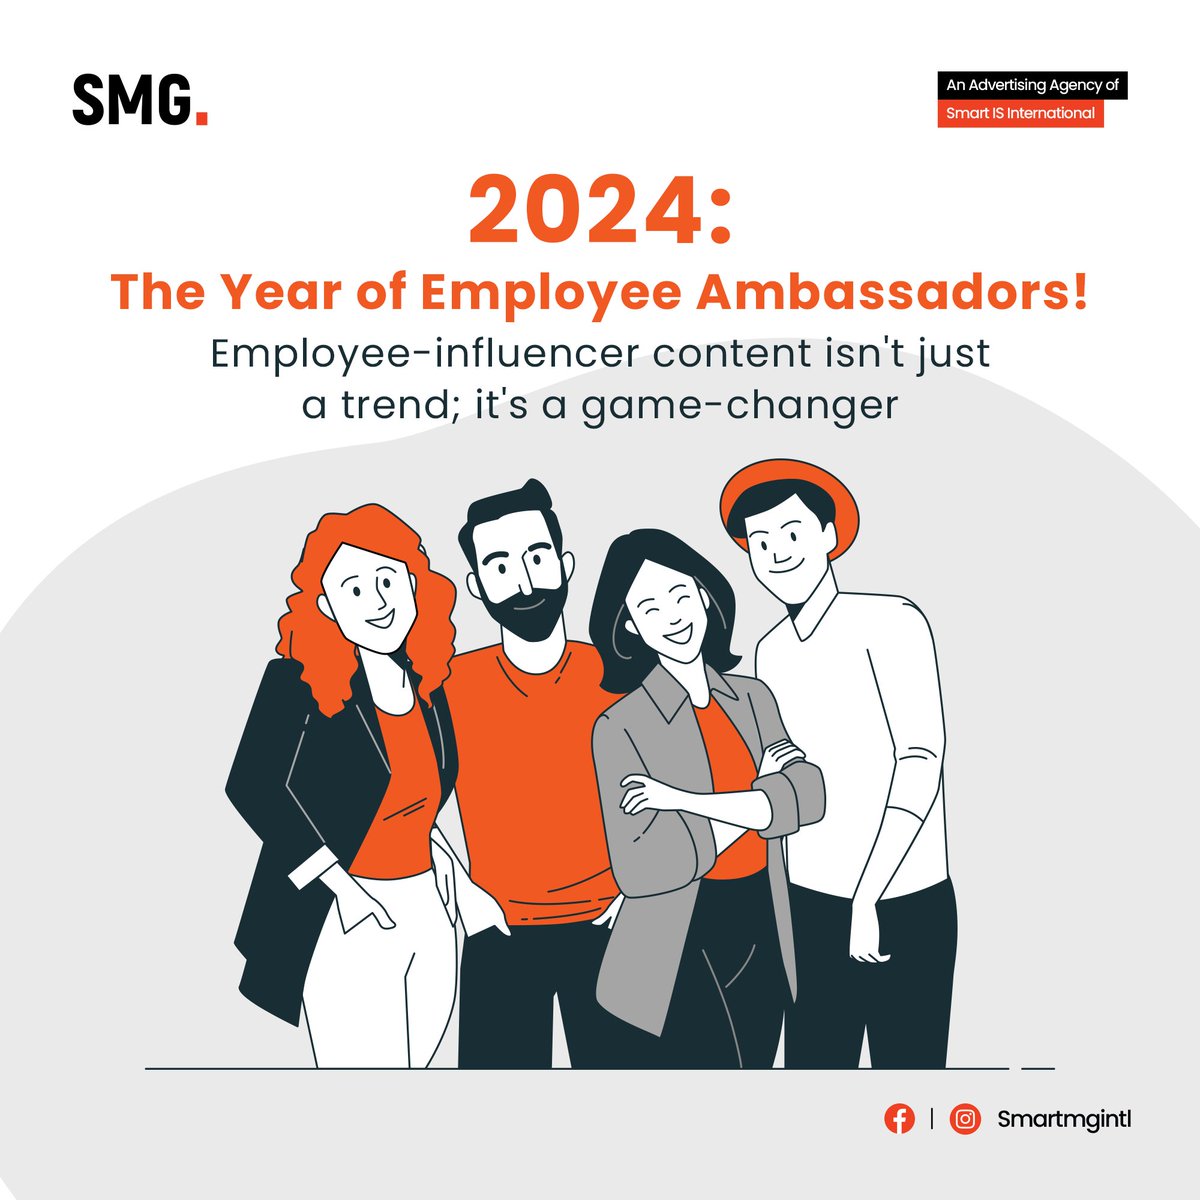 As we dive into the future, authenticity reigns supreme. More than ever, customers crave personal connections with brands, and what better way to foster that than through your own team? 

#SMG #EmployeeAmbassadors #ContentMarketing #DigitalMarketingTrends #SmartMarketing